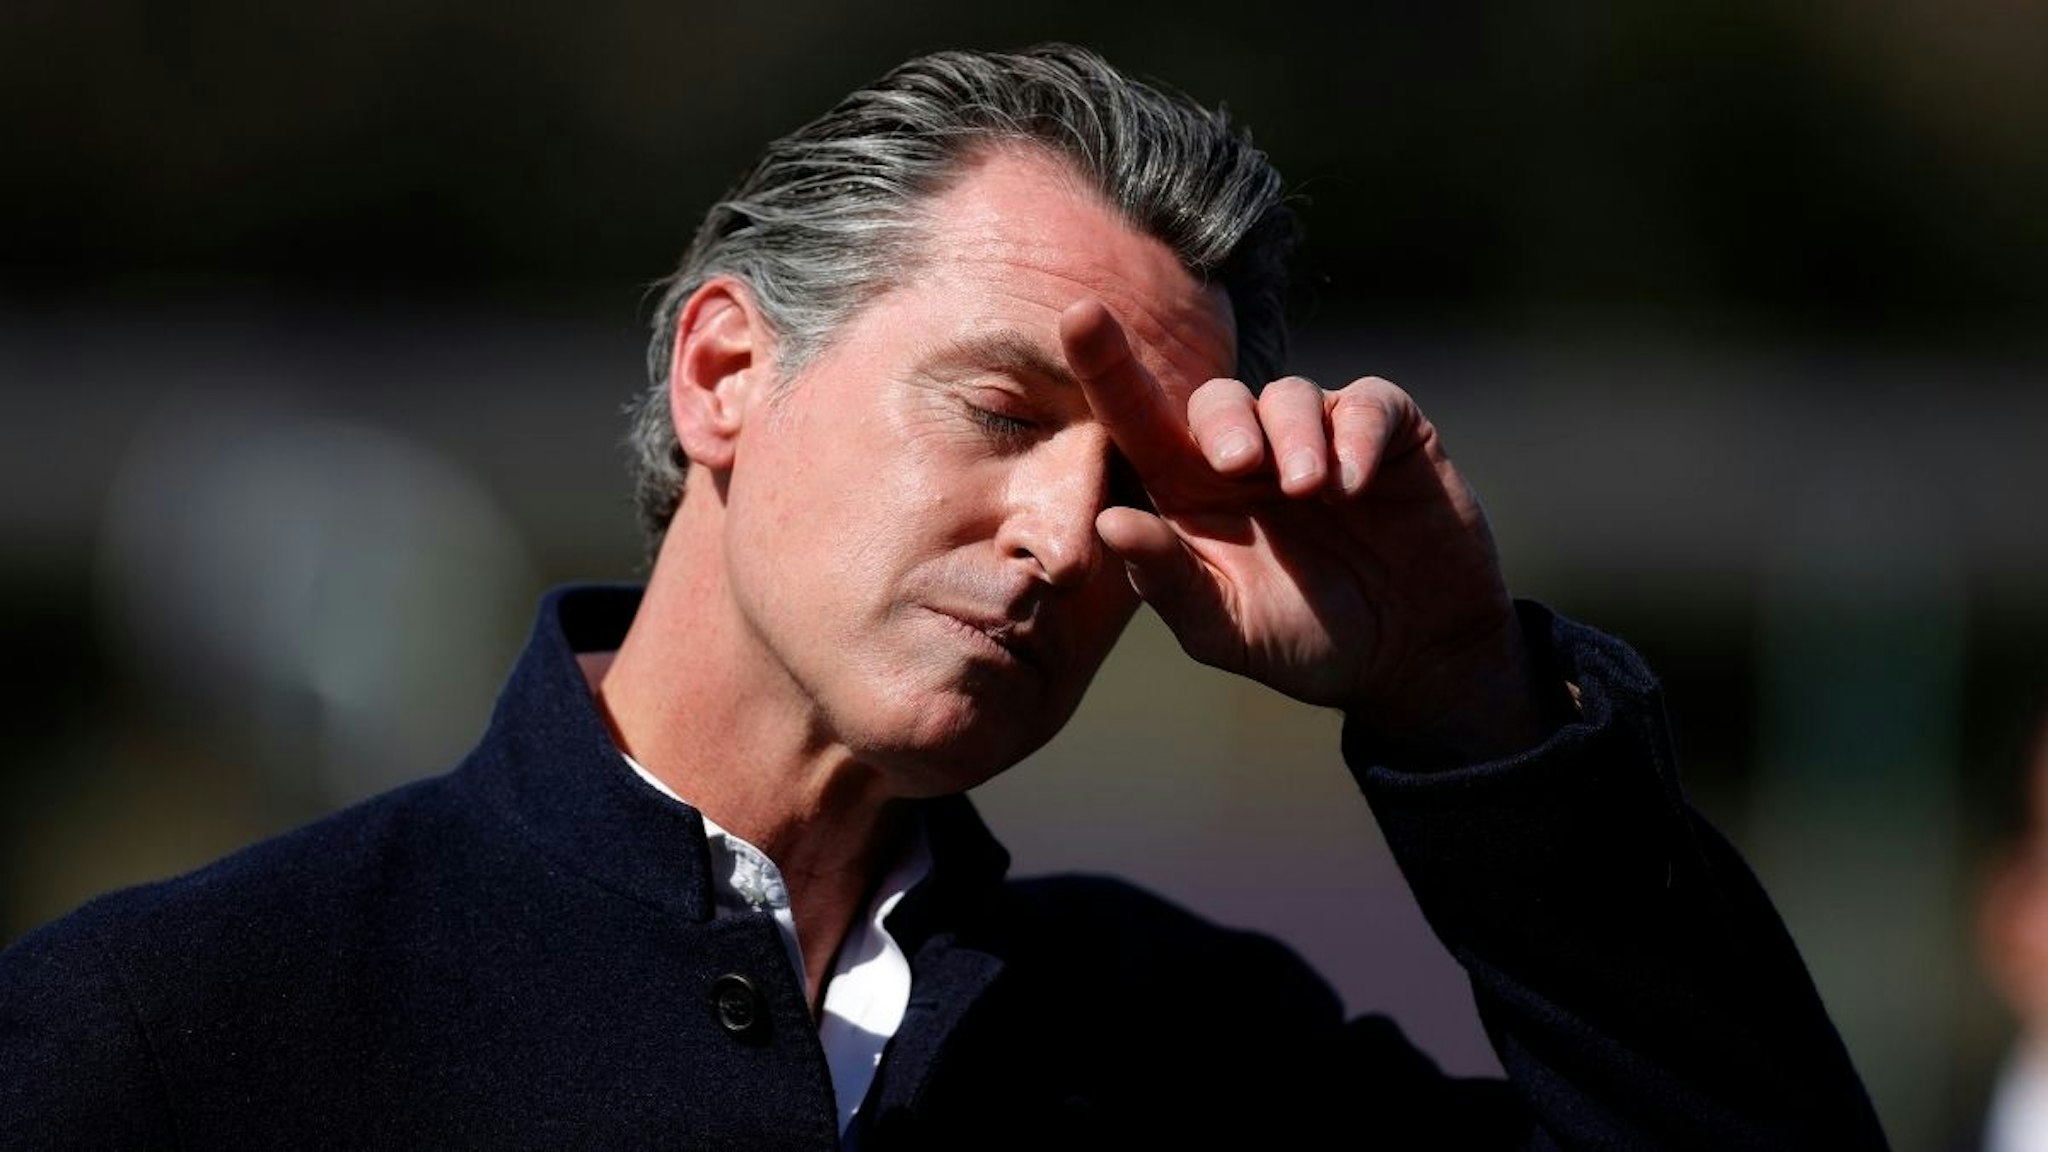 California Gov. Gavin Newsom pauses during a news conference after touring Barron Park Elementary School on March 02, 2021 in Palo Alto, California.